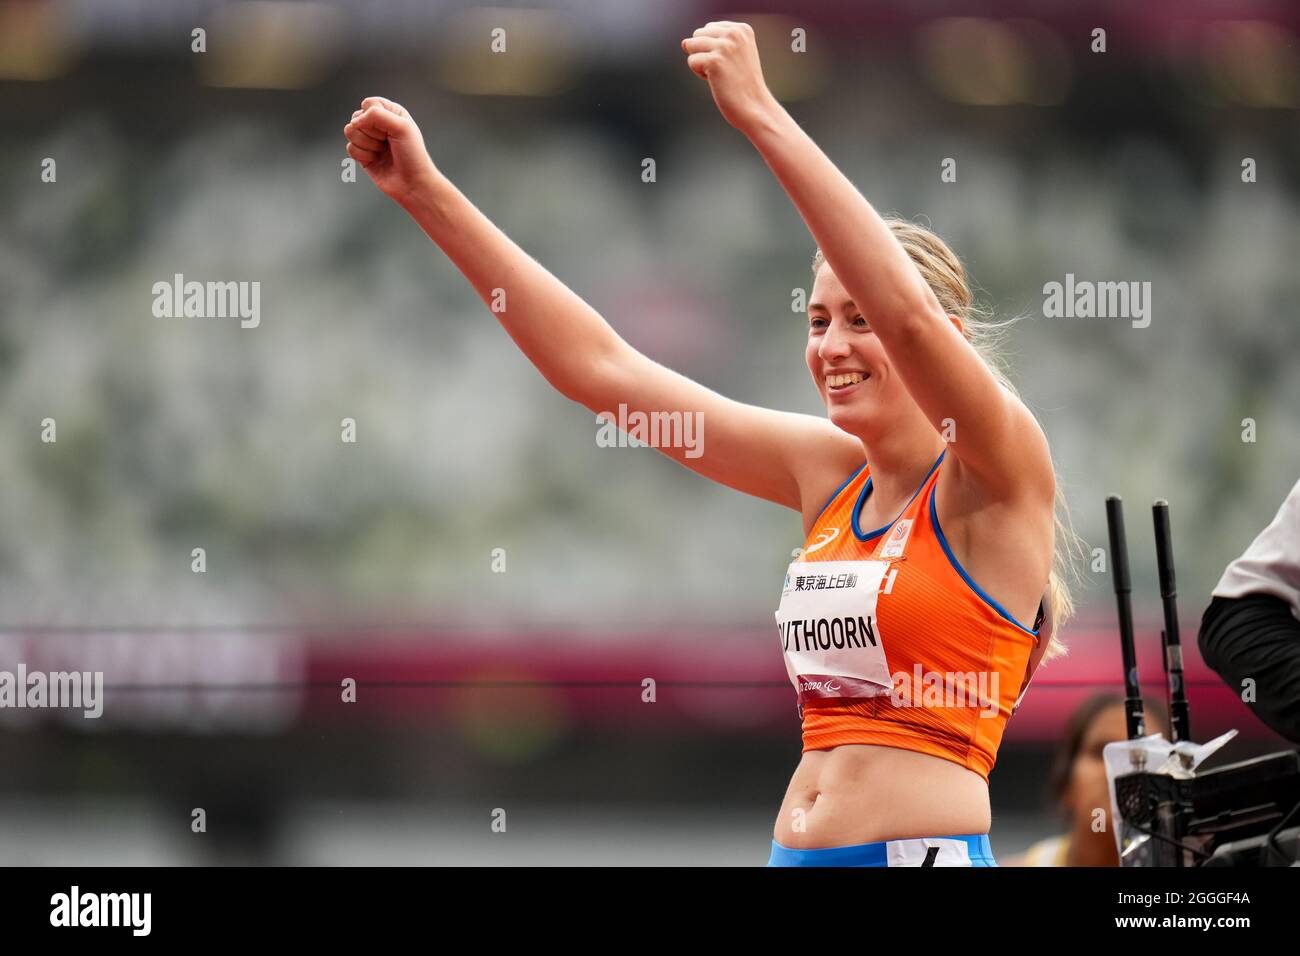 TOKYO, JAPAN - SEPTEMBER 1: Cheyenne Bouthoorn of the Netherlands after competing in the Women's 100m T36 Heats during the Tokyo 2020 Paralympic Games at Olympic Stadium on September 1, 2021 in Tokyo, Japan (Photo by Helene Wiesenhaan/Orange Pictures) NOCNSF Atletiekunie Stock Photo